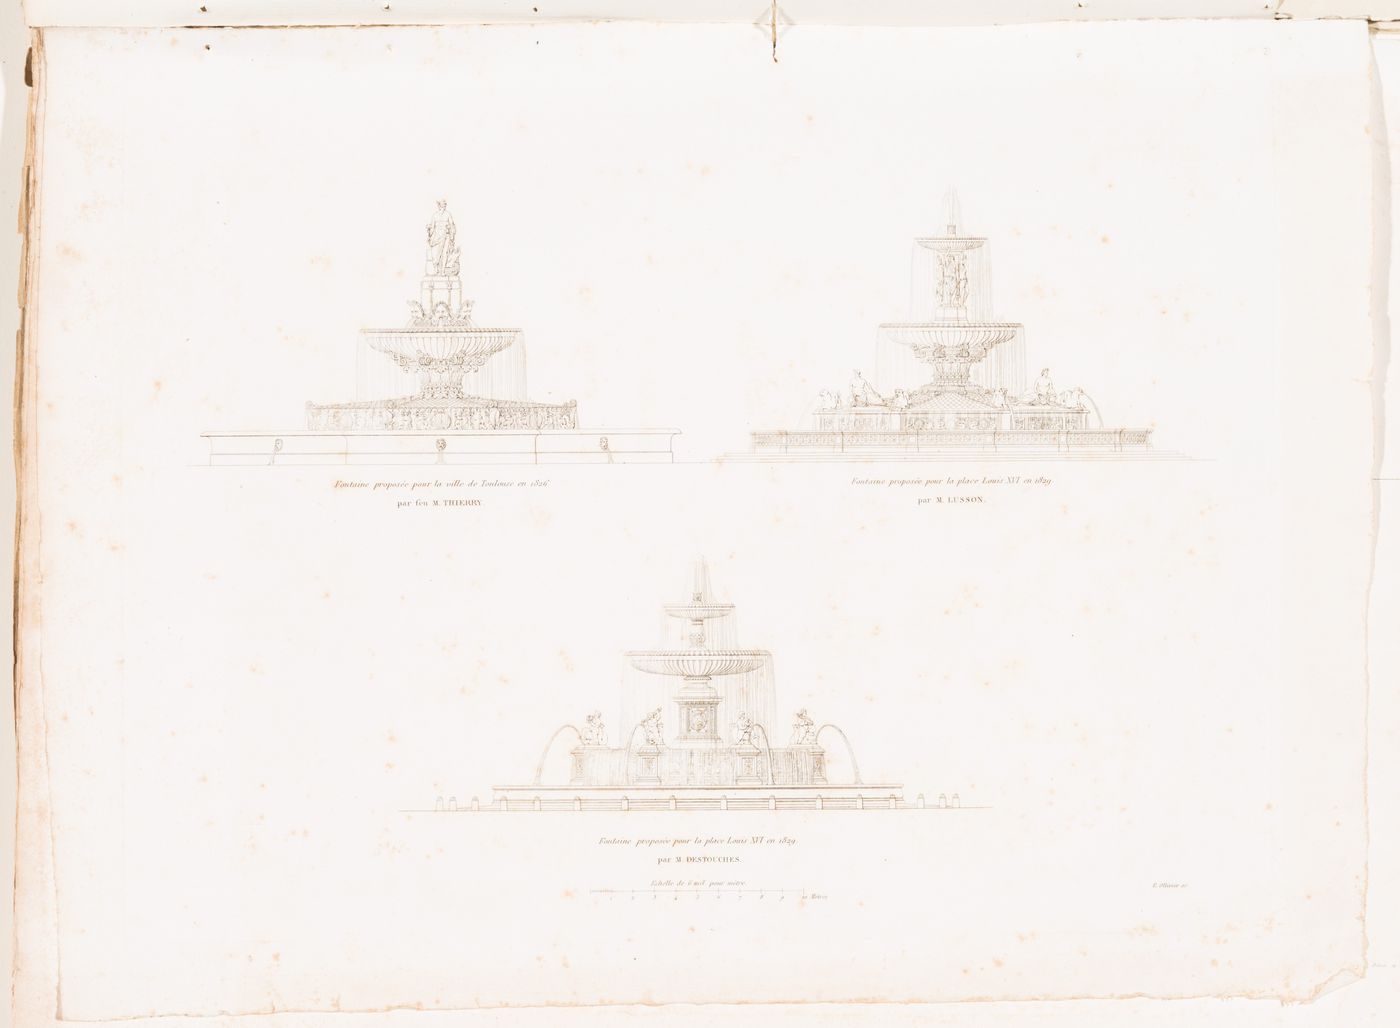 Elevation for a fountain for the city of Toulouse by Thierry and elevations for fountains for place Louis XV by Lusson and by Destouches